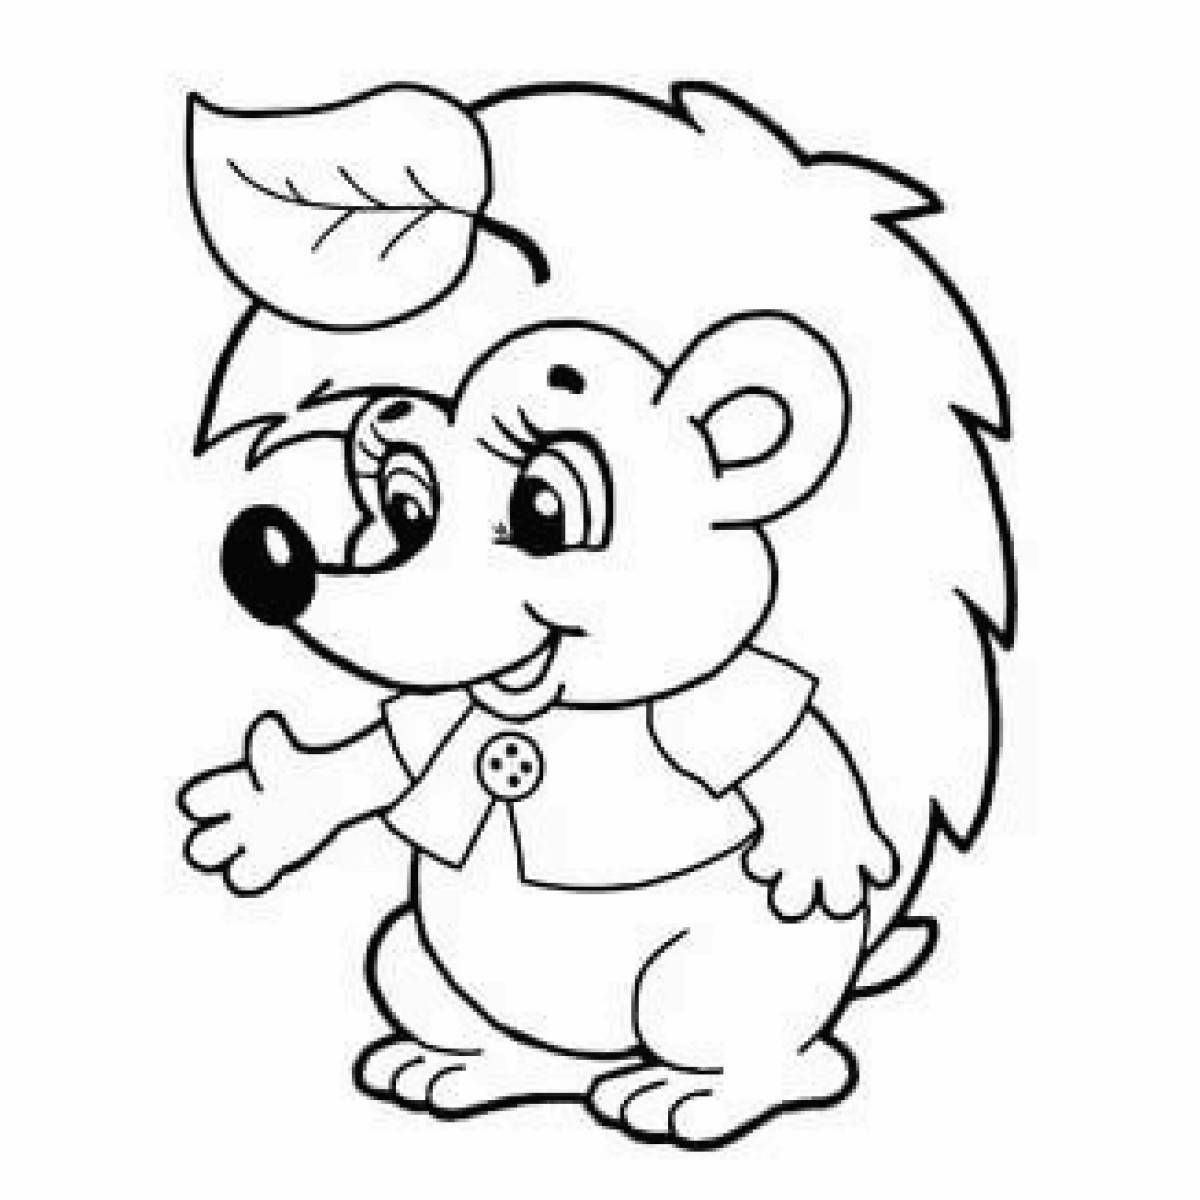 Animated drawing of a hedgehog for children